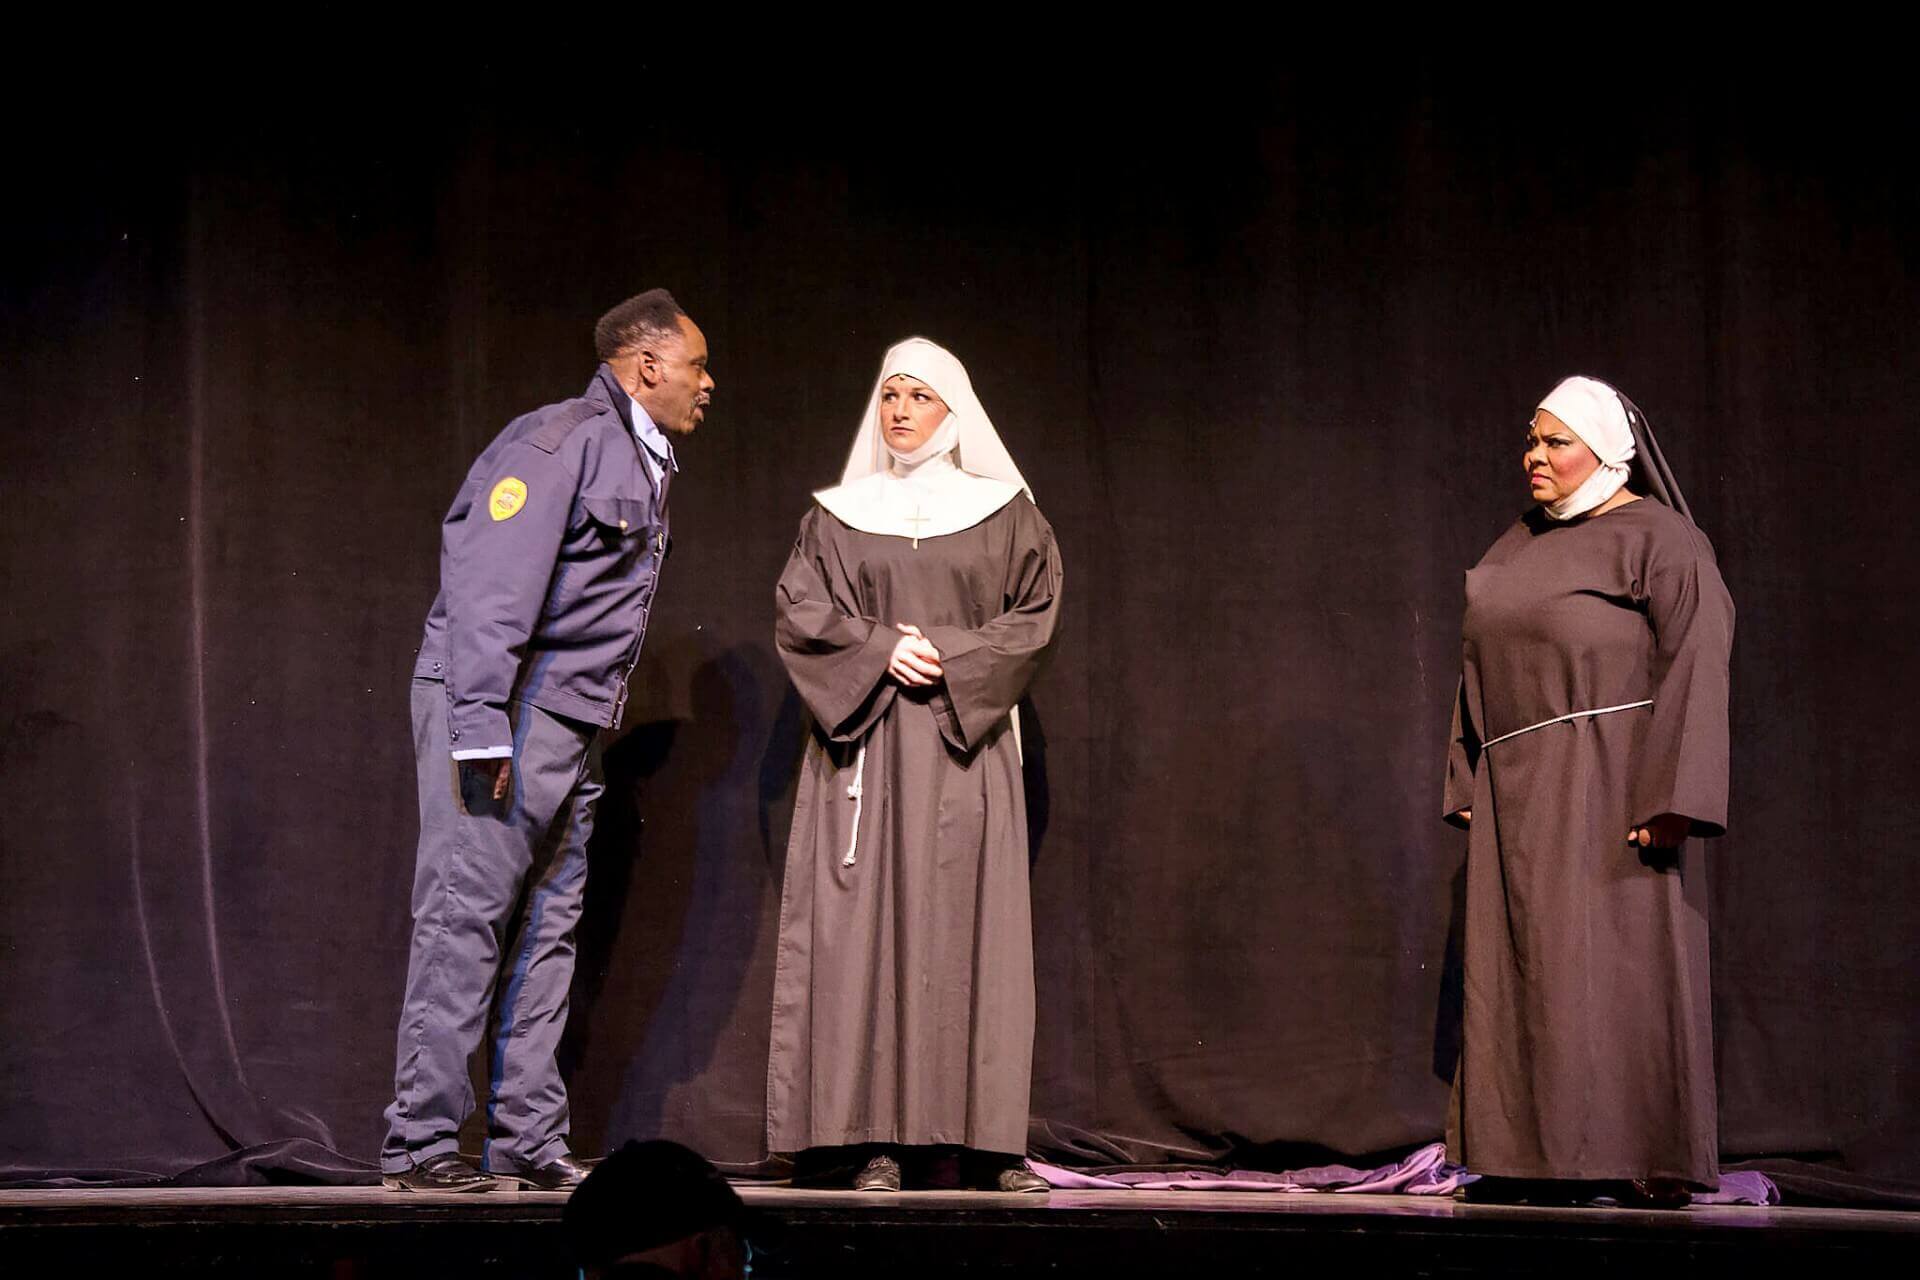 TJ Costume - Sister Act Costume Rental pictures - Stagecraft Theatrical